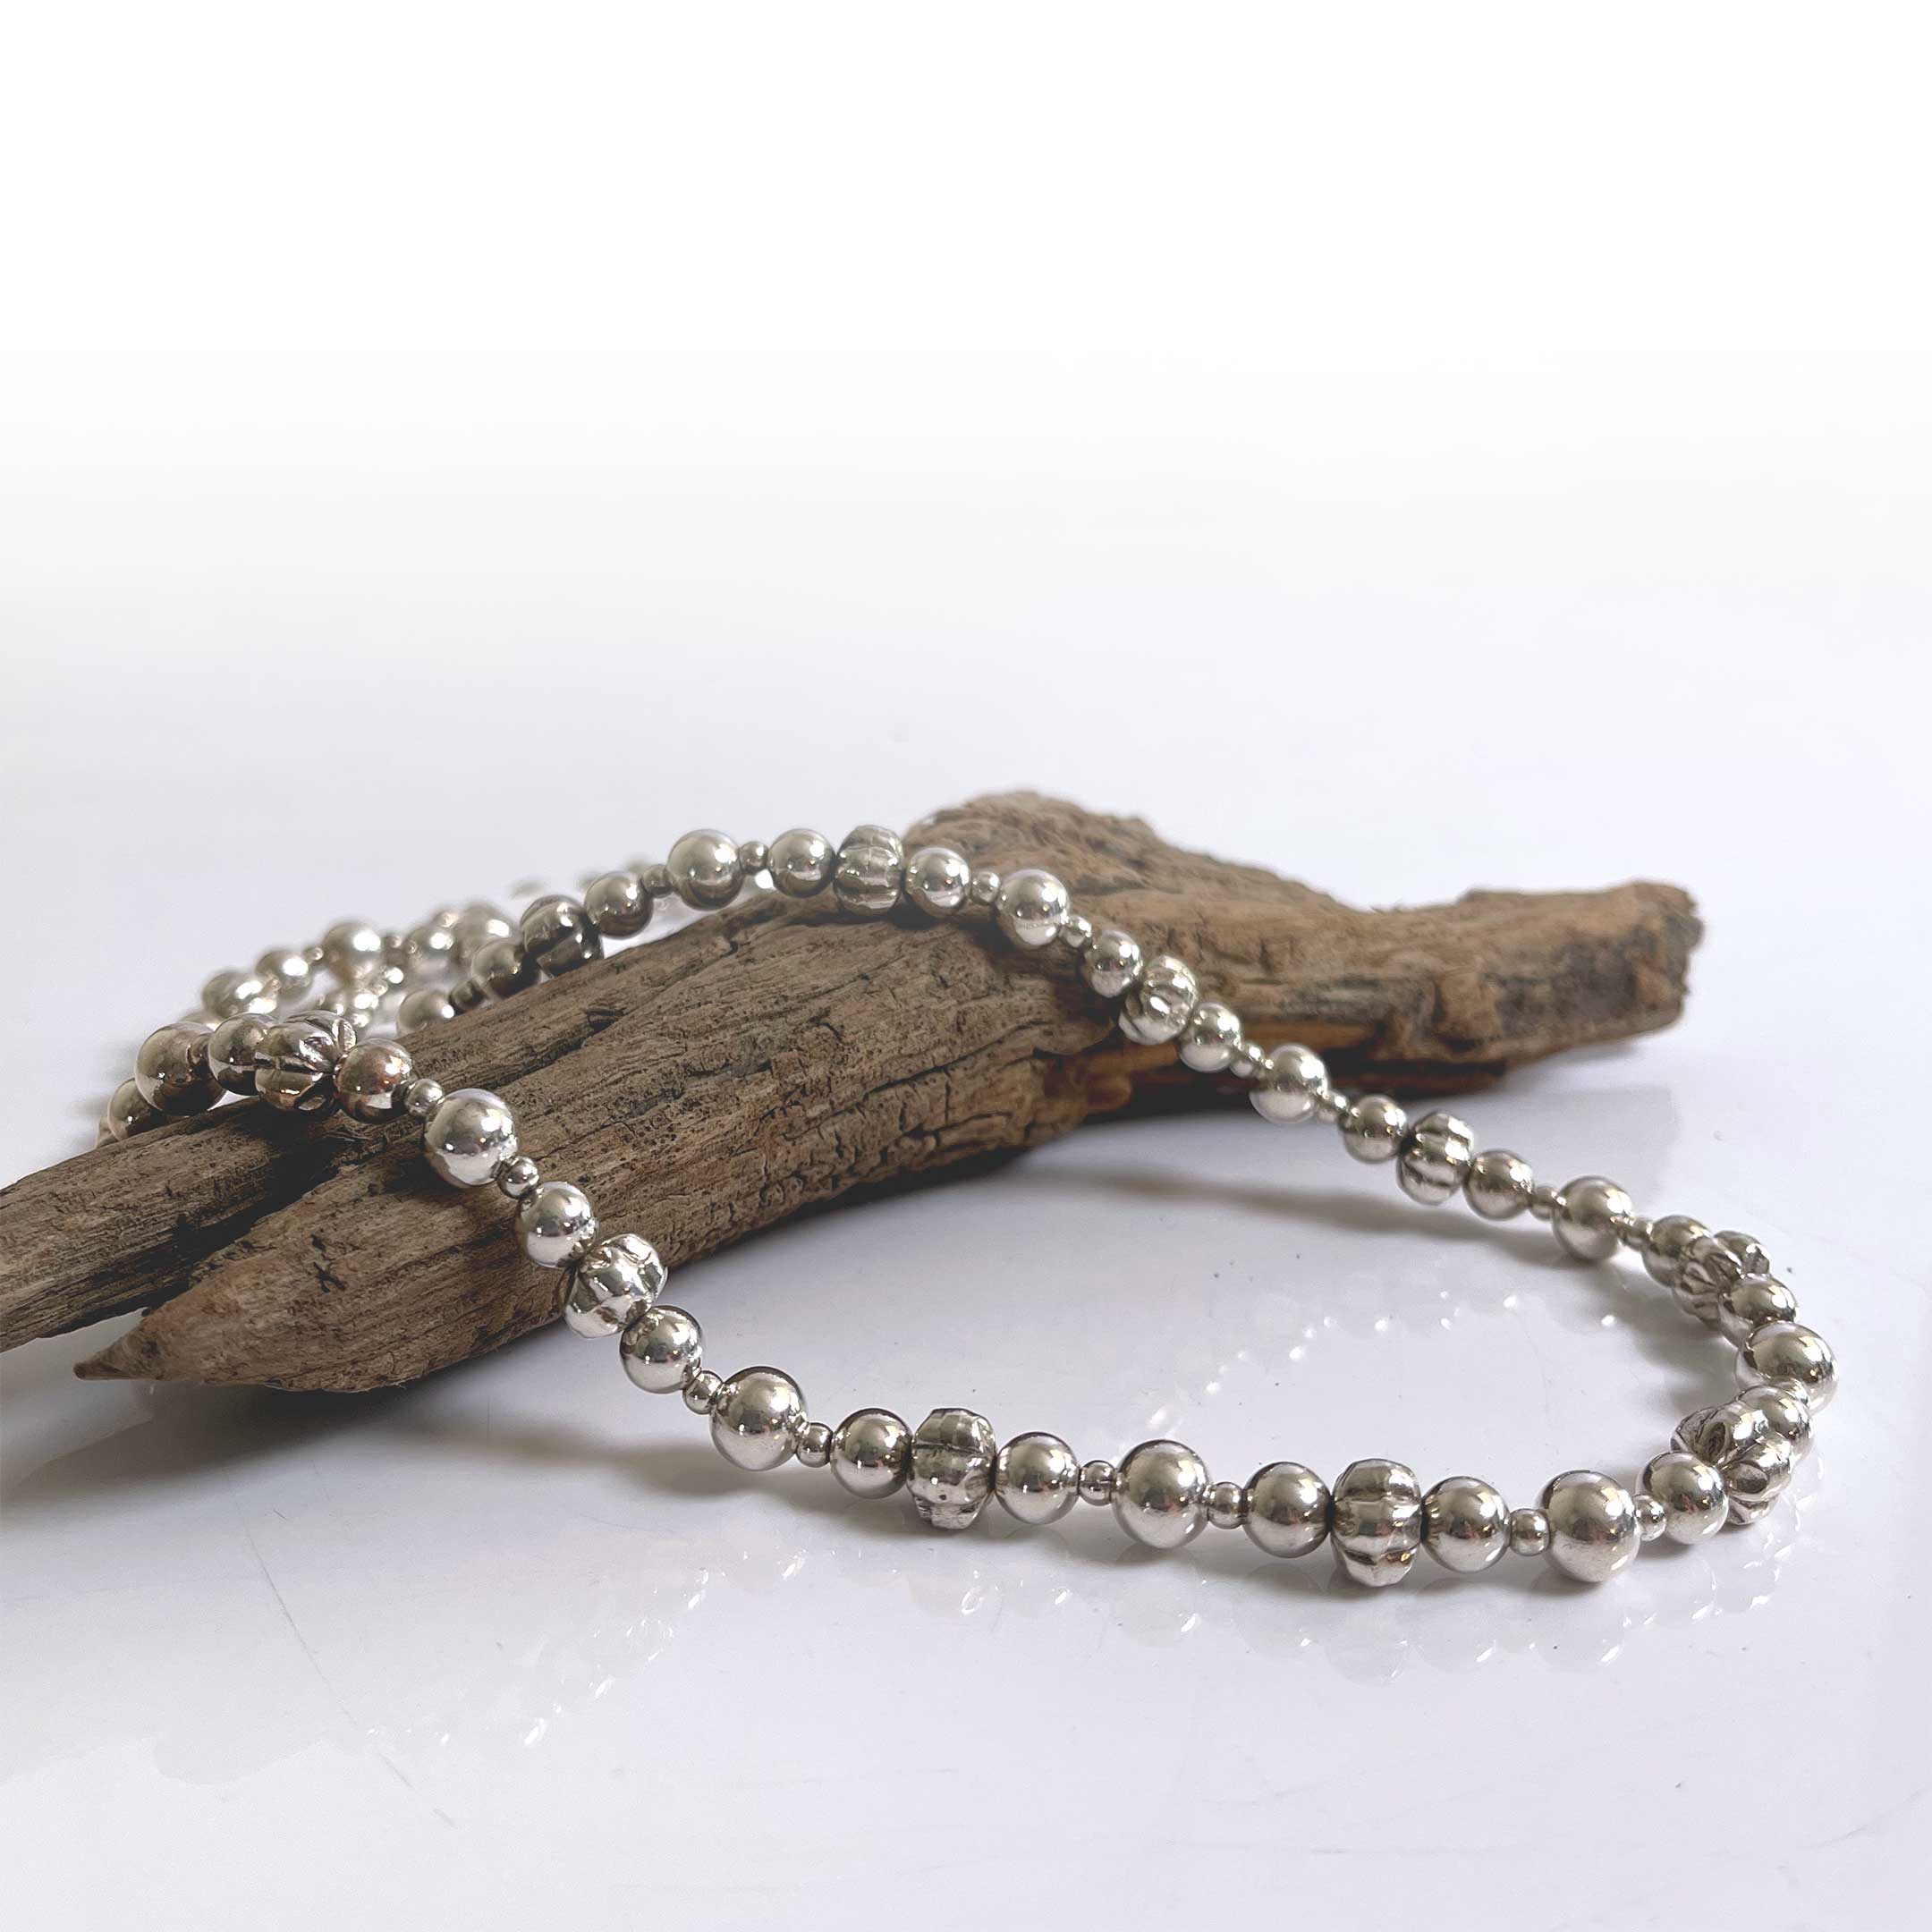 Sterling silver beaded necklace